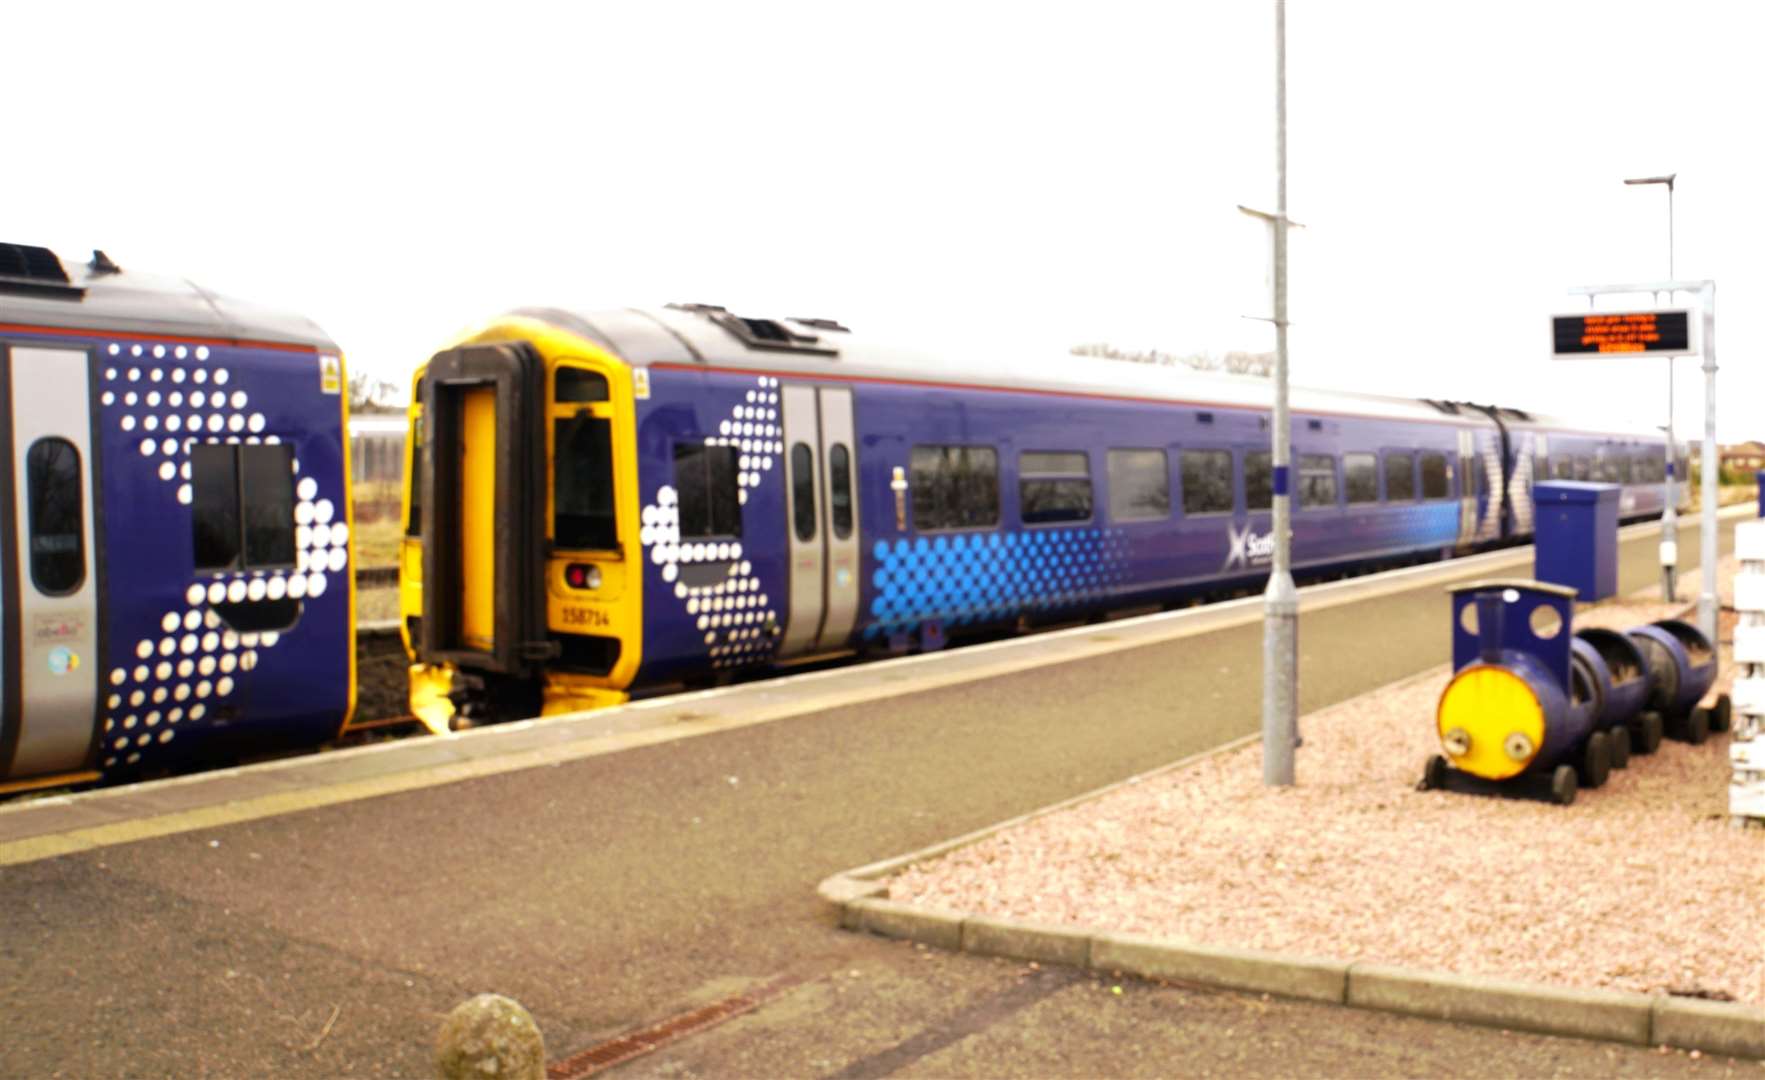 ScotRail has been working hard to keep its trains clean to avoid contamination during the pandemic. Picture: DGS